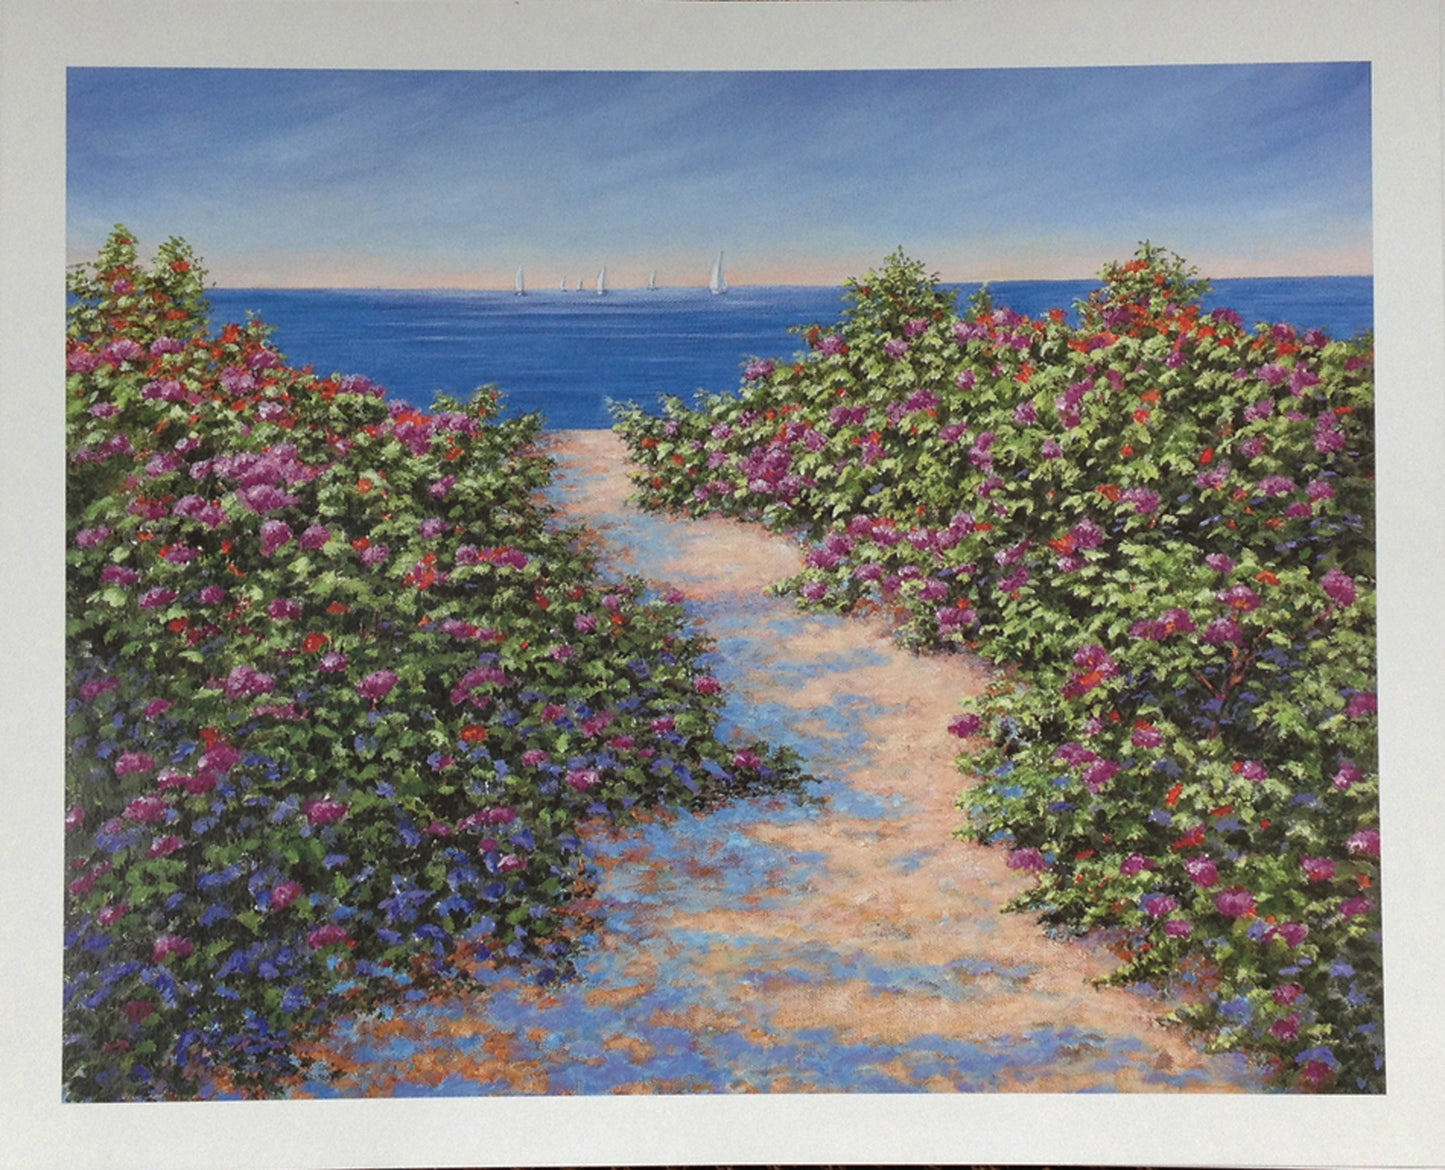 Beach Rose Path” 15″ x 19″ Signed and Numbered Lithograph by JoAnn Corretti